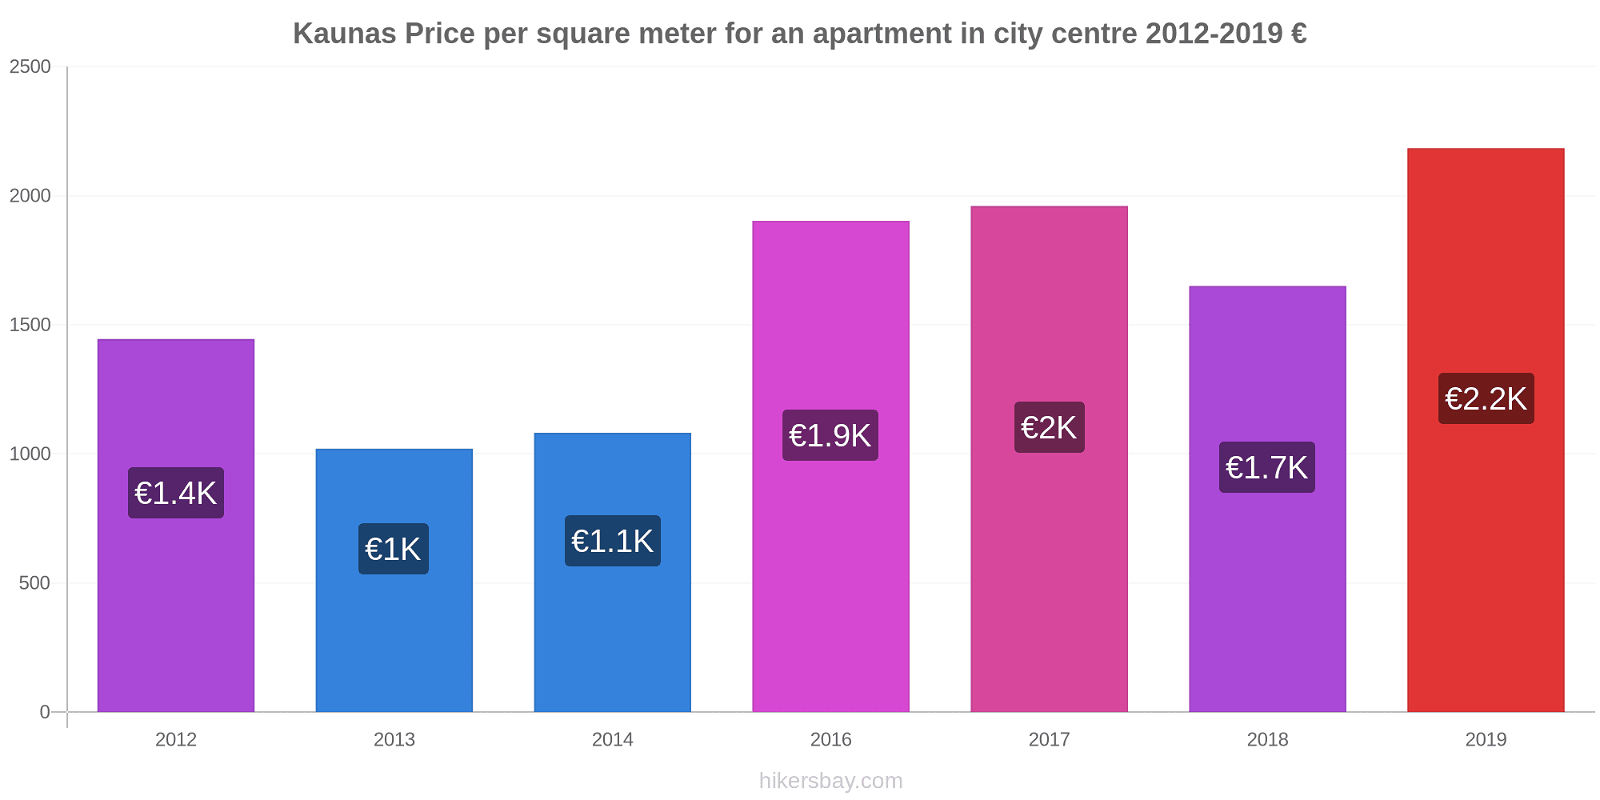 Kaunas price changes Price per square meter for an apartment in city centre hikersbay.com